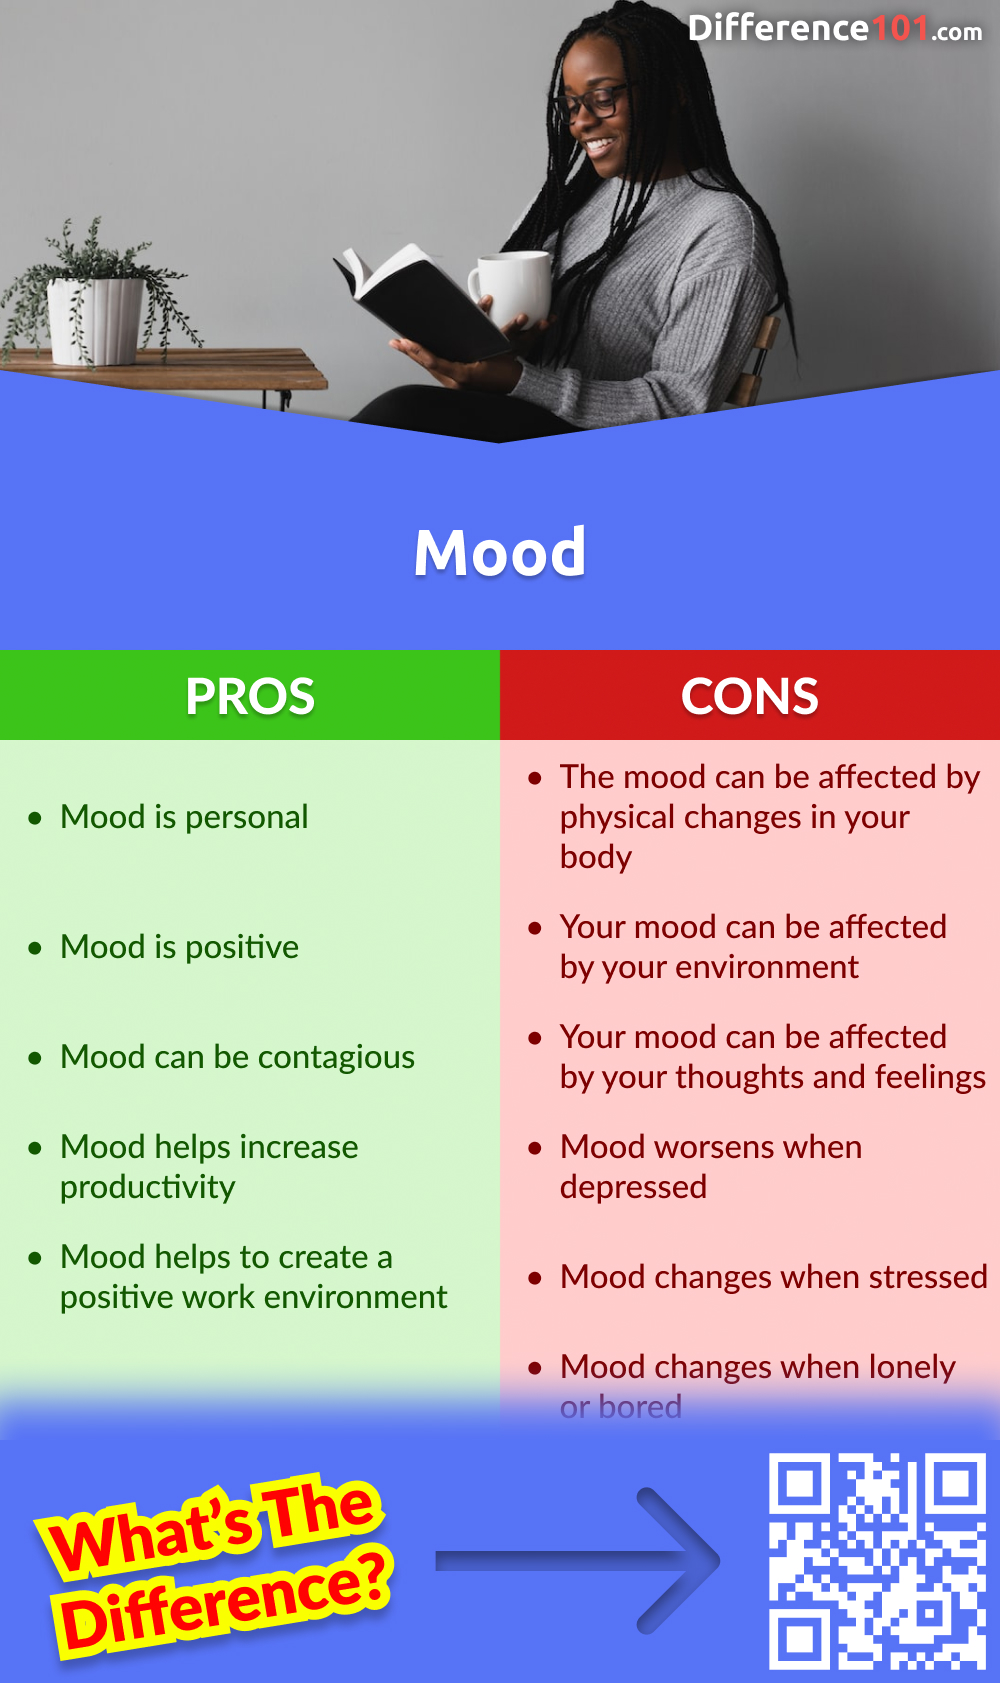 Mood Pros & Cons
